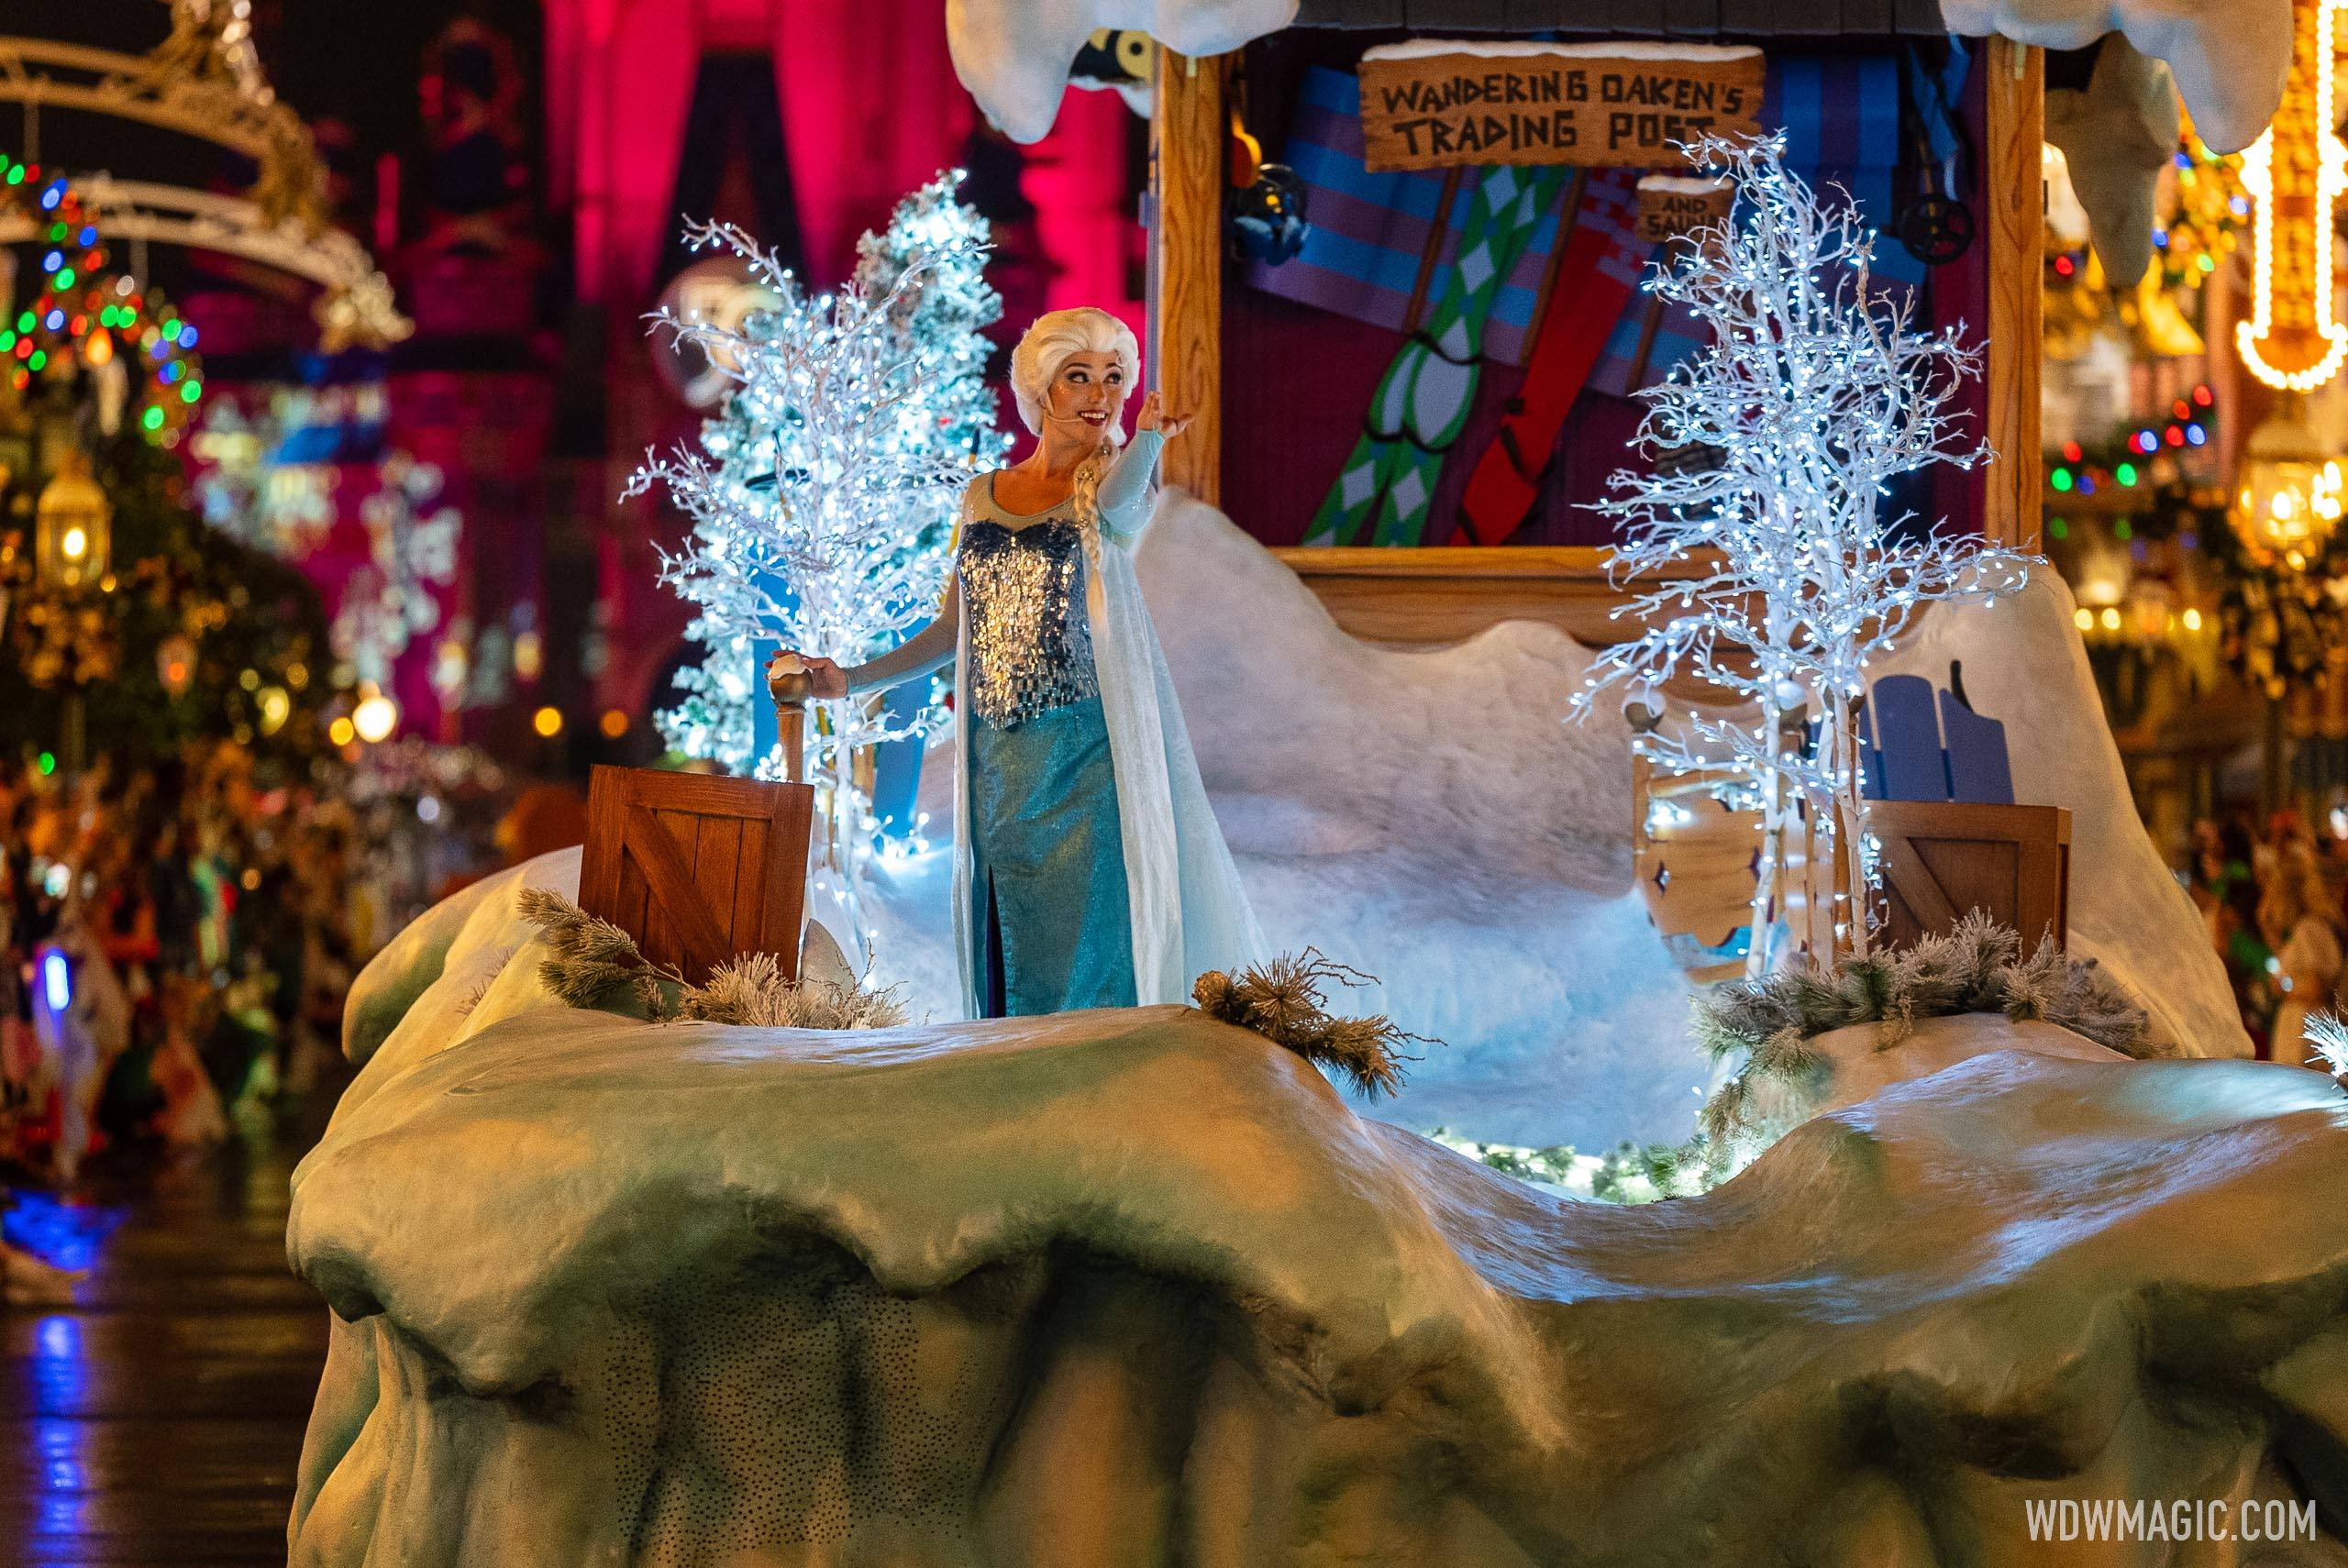 'Mickey's Once Upon a Christmastime Parade' to be shown during regular park hours again this year